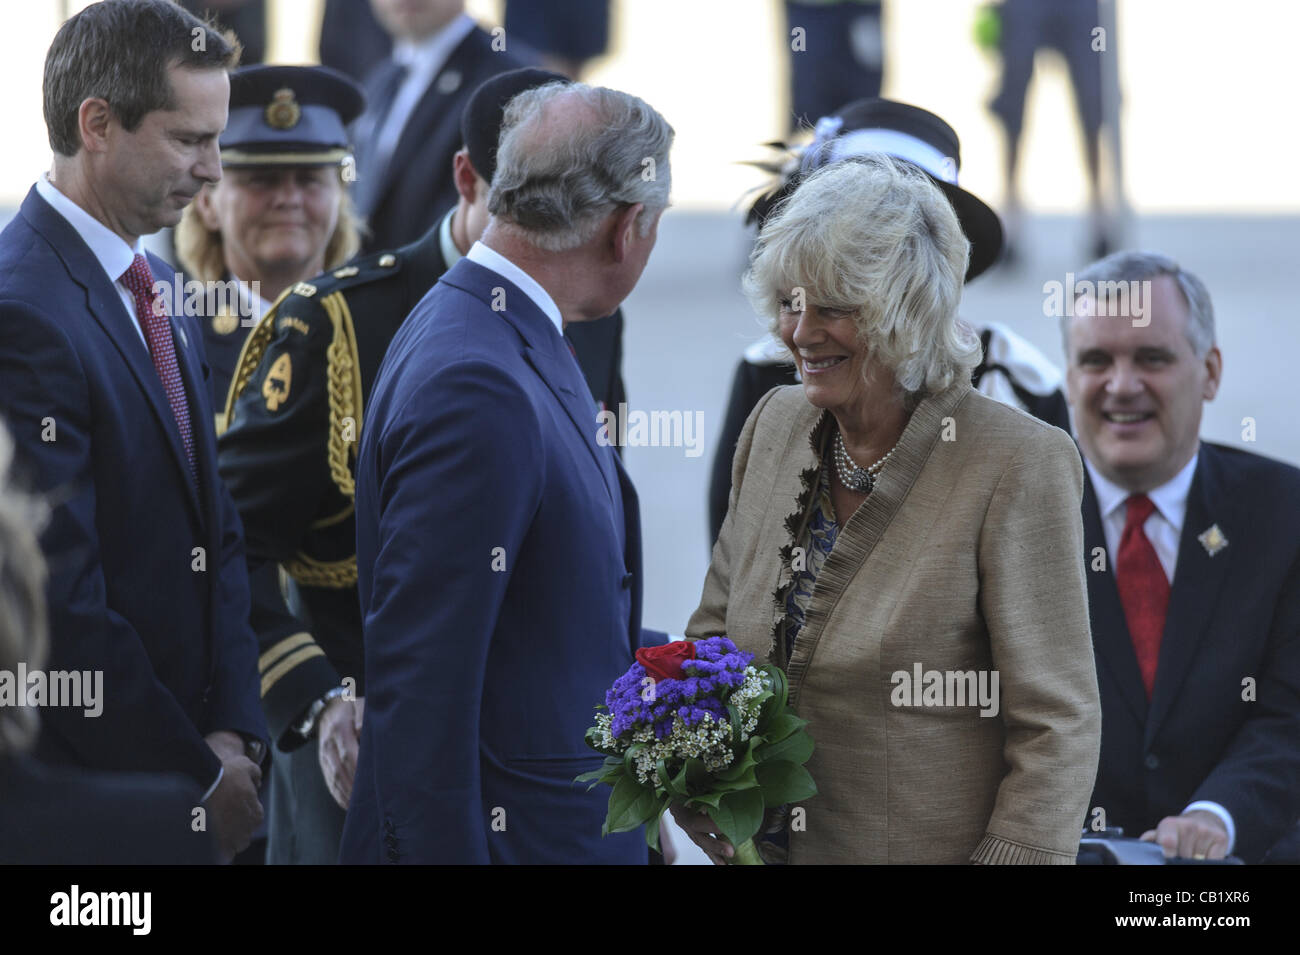 May 21, 2012 - Toronto, Ontario, Canada - PRINCE CHARLES and his wife CAMILLA, Duchess of Cornwall have kicked off the Ontario leg of their Canadian tour. In picture - Ontratio Premier DALTON MCGUINTY, PRINCE CHARLES, The Duchess of Cornwall CAMILLA, Ontario Lieutenant Governor DAVID ONLEY (Credit I Stock Photo